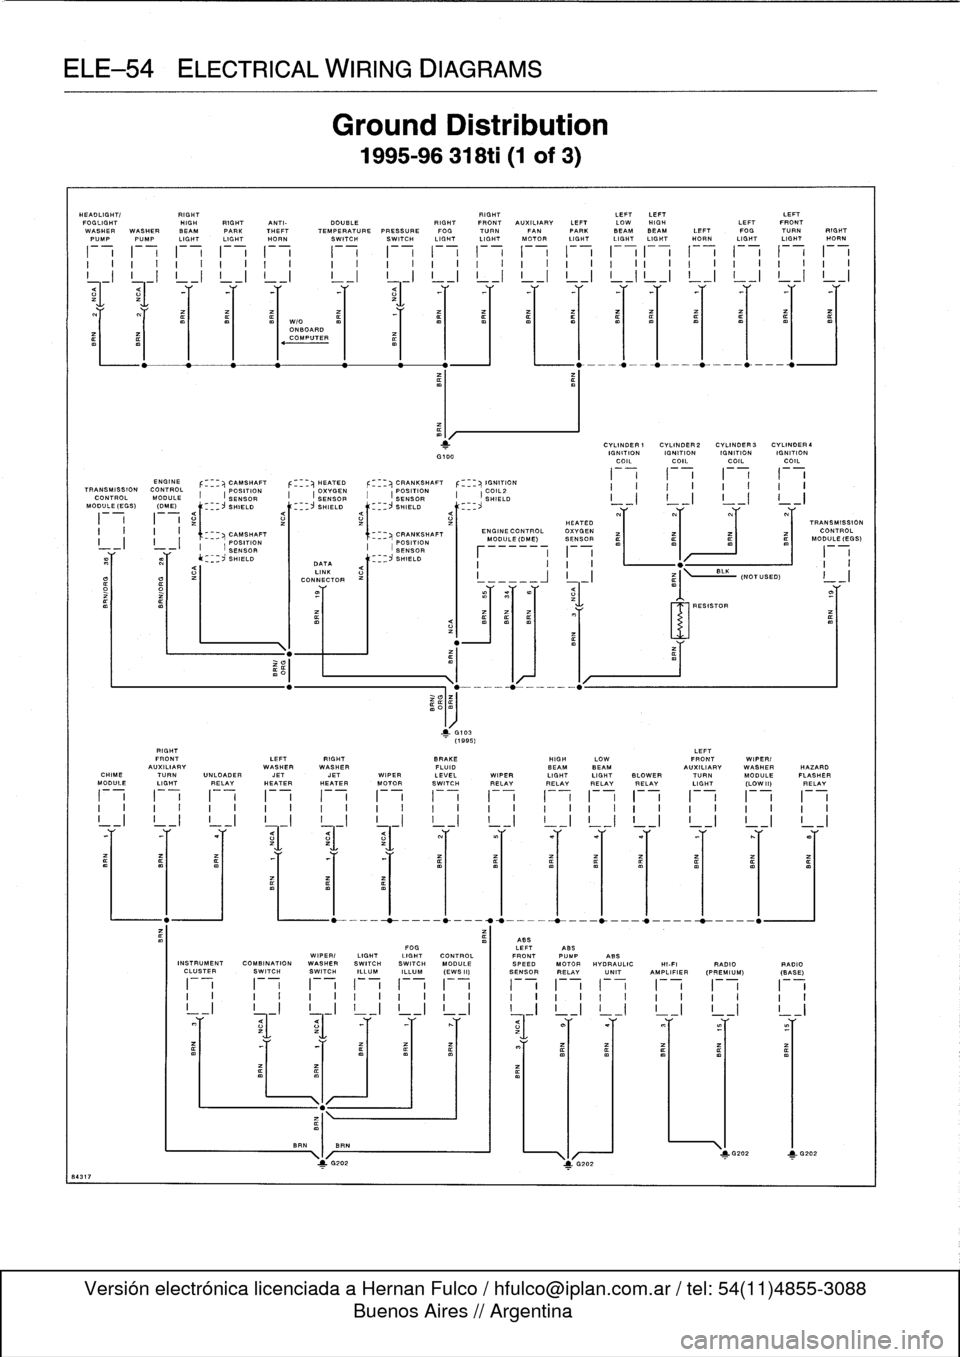 BMW 318i 1997 E36 Owners Manual 
ELE-54
ELECTRICAL
WIRING
DIAGRAMS

HEADLIGHT/

	

RIGHT

	

RIGHT

	

LEFTLEFT

	

LEFT
FOGLIGHT

	

HIGH
RIGHT
ANTI-

	

DOUBLE

	

RIGHT
FRONT
AUXILIARY
LEFT
LOW
HIGH

	

LEFT
FRONT
WASHER
WASHER
B